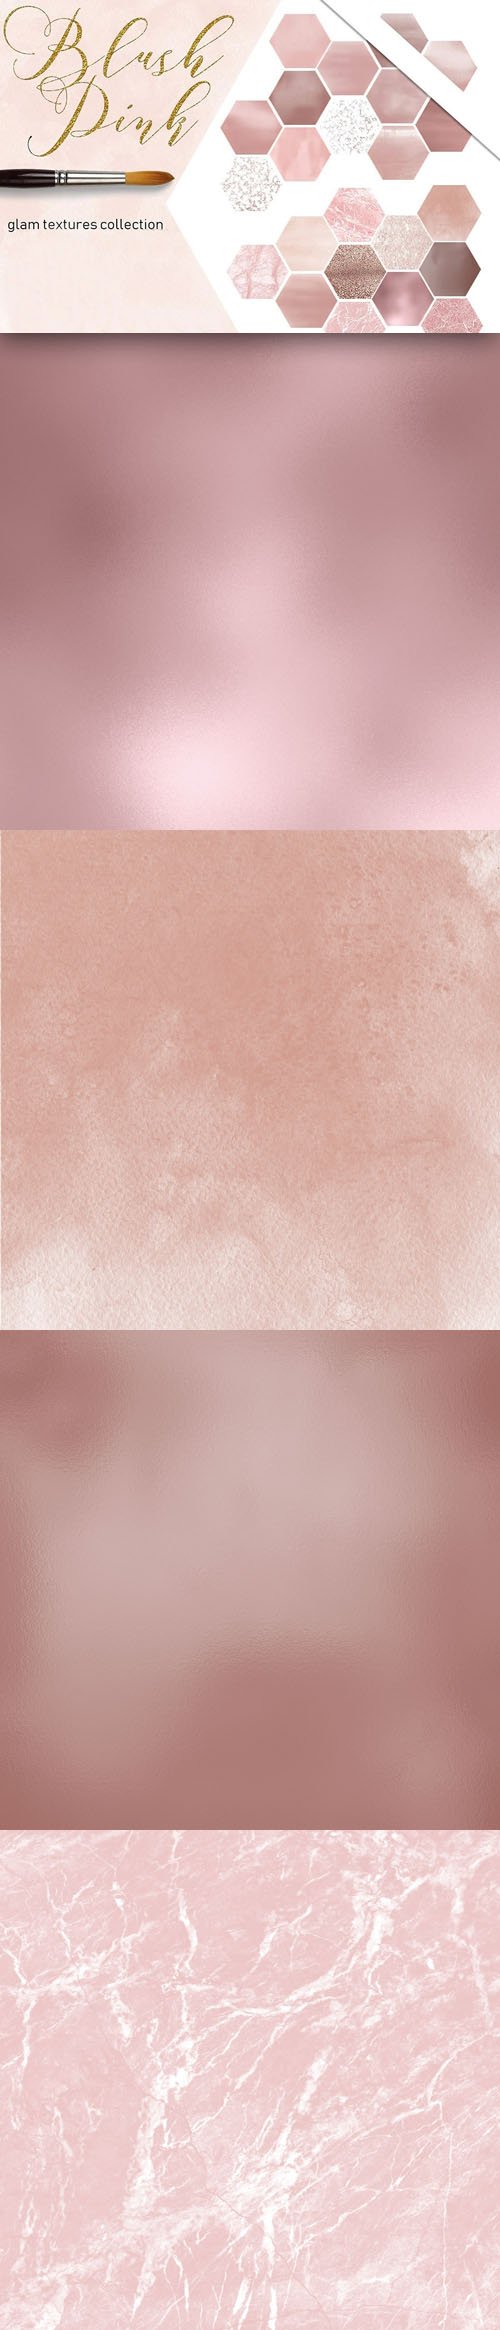 Blush Pink - Glam Textures Collection